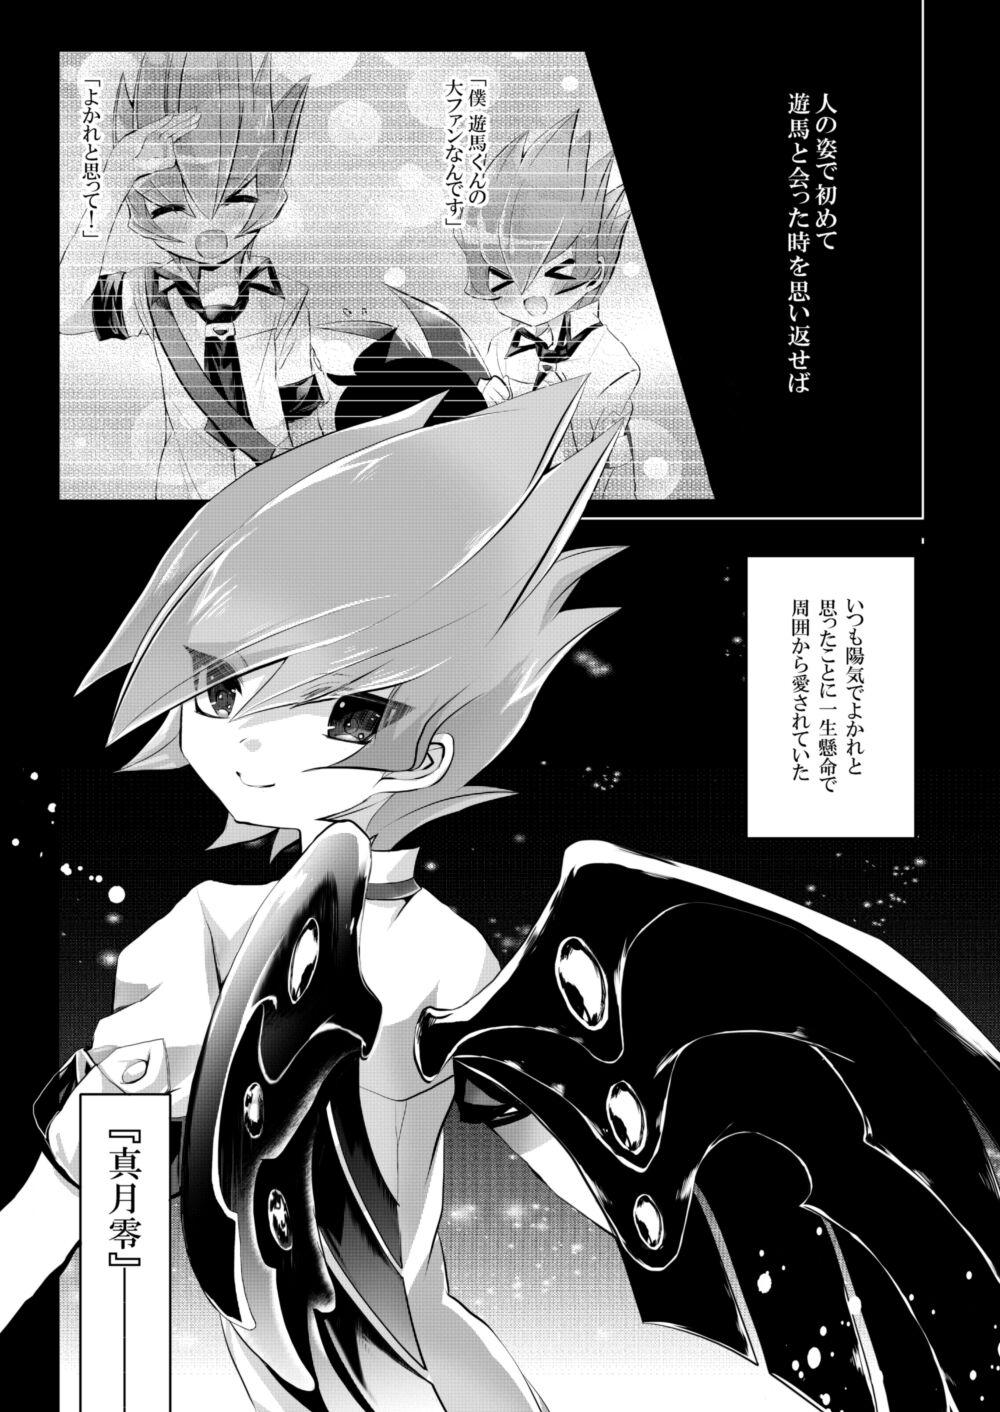 Latex PARANOIA! - Yu-gi-oh zexal High Definition - Page 6